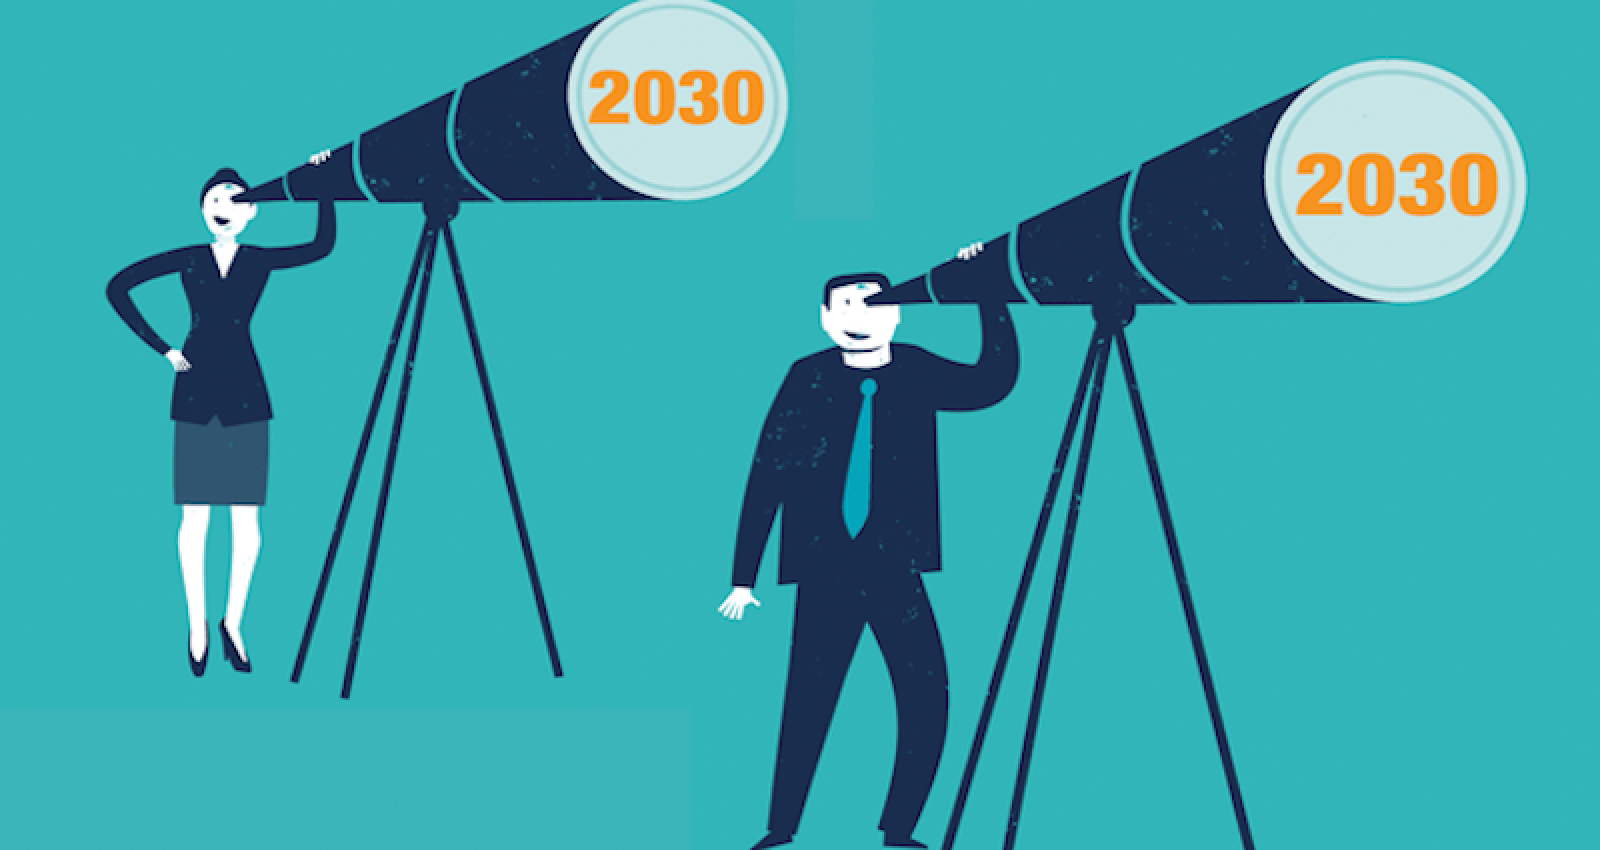 Evaluation 2030 - What Does the Future Look Like?